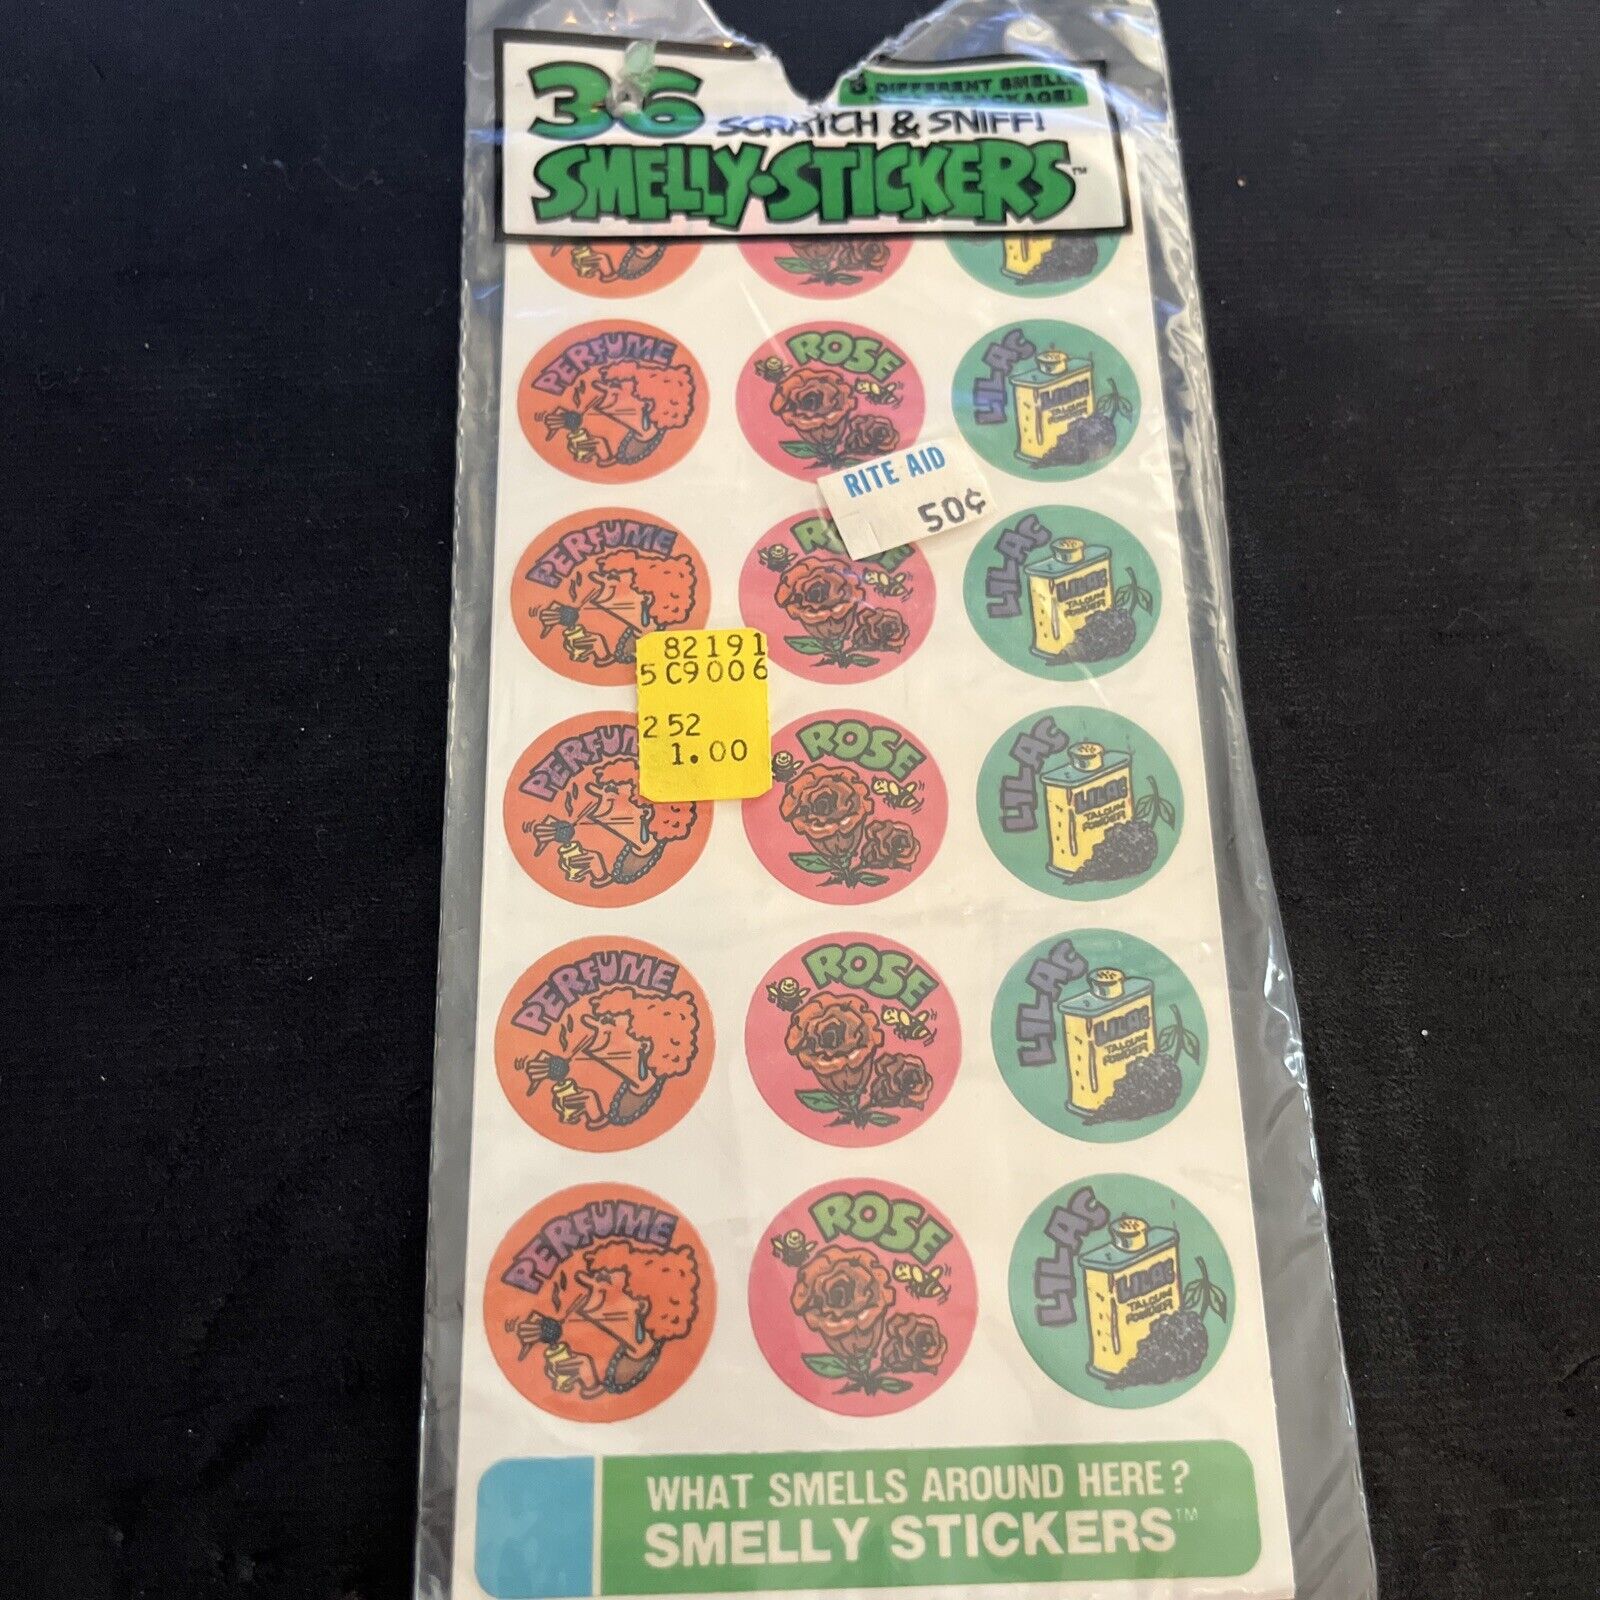 NEW Vintage 80’s Gordy Scratch & Sniff Stickers - 6 Different Scents